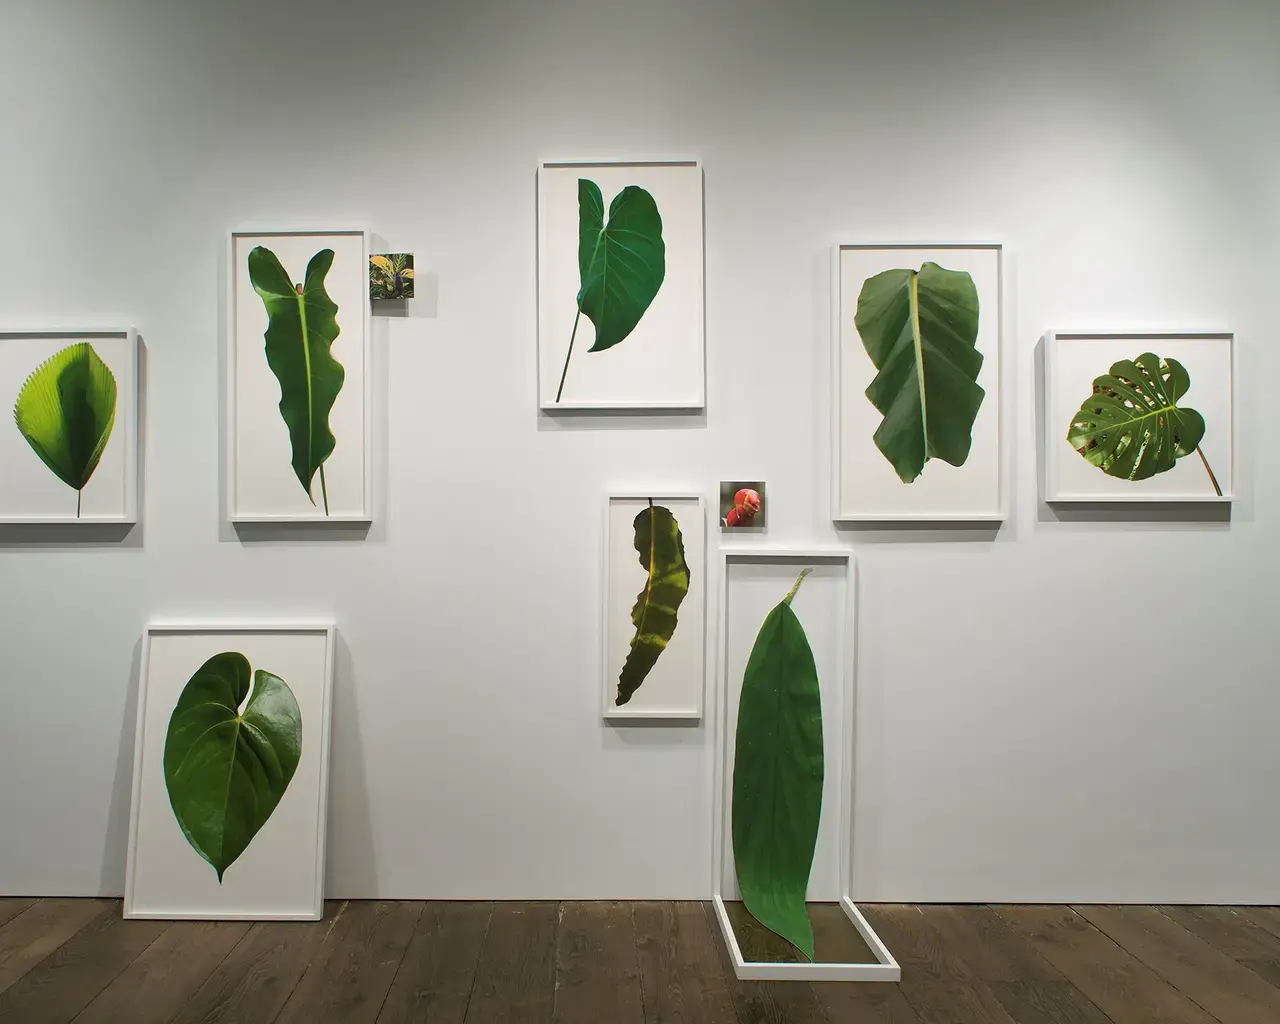 Leaf Wall from the installation &ldquo;Traveling into View&rdquo;, Bridgette Mayer Gallery, 2015. Photo courtesy of the artist.